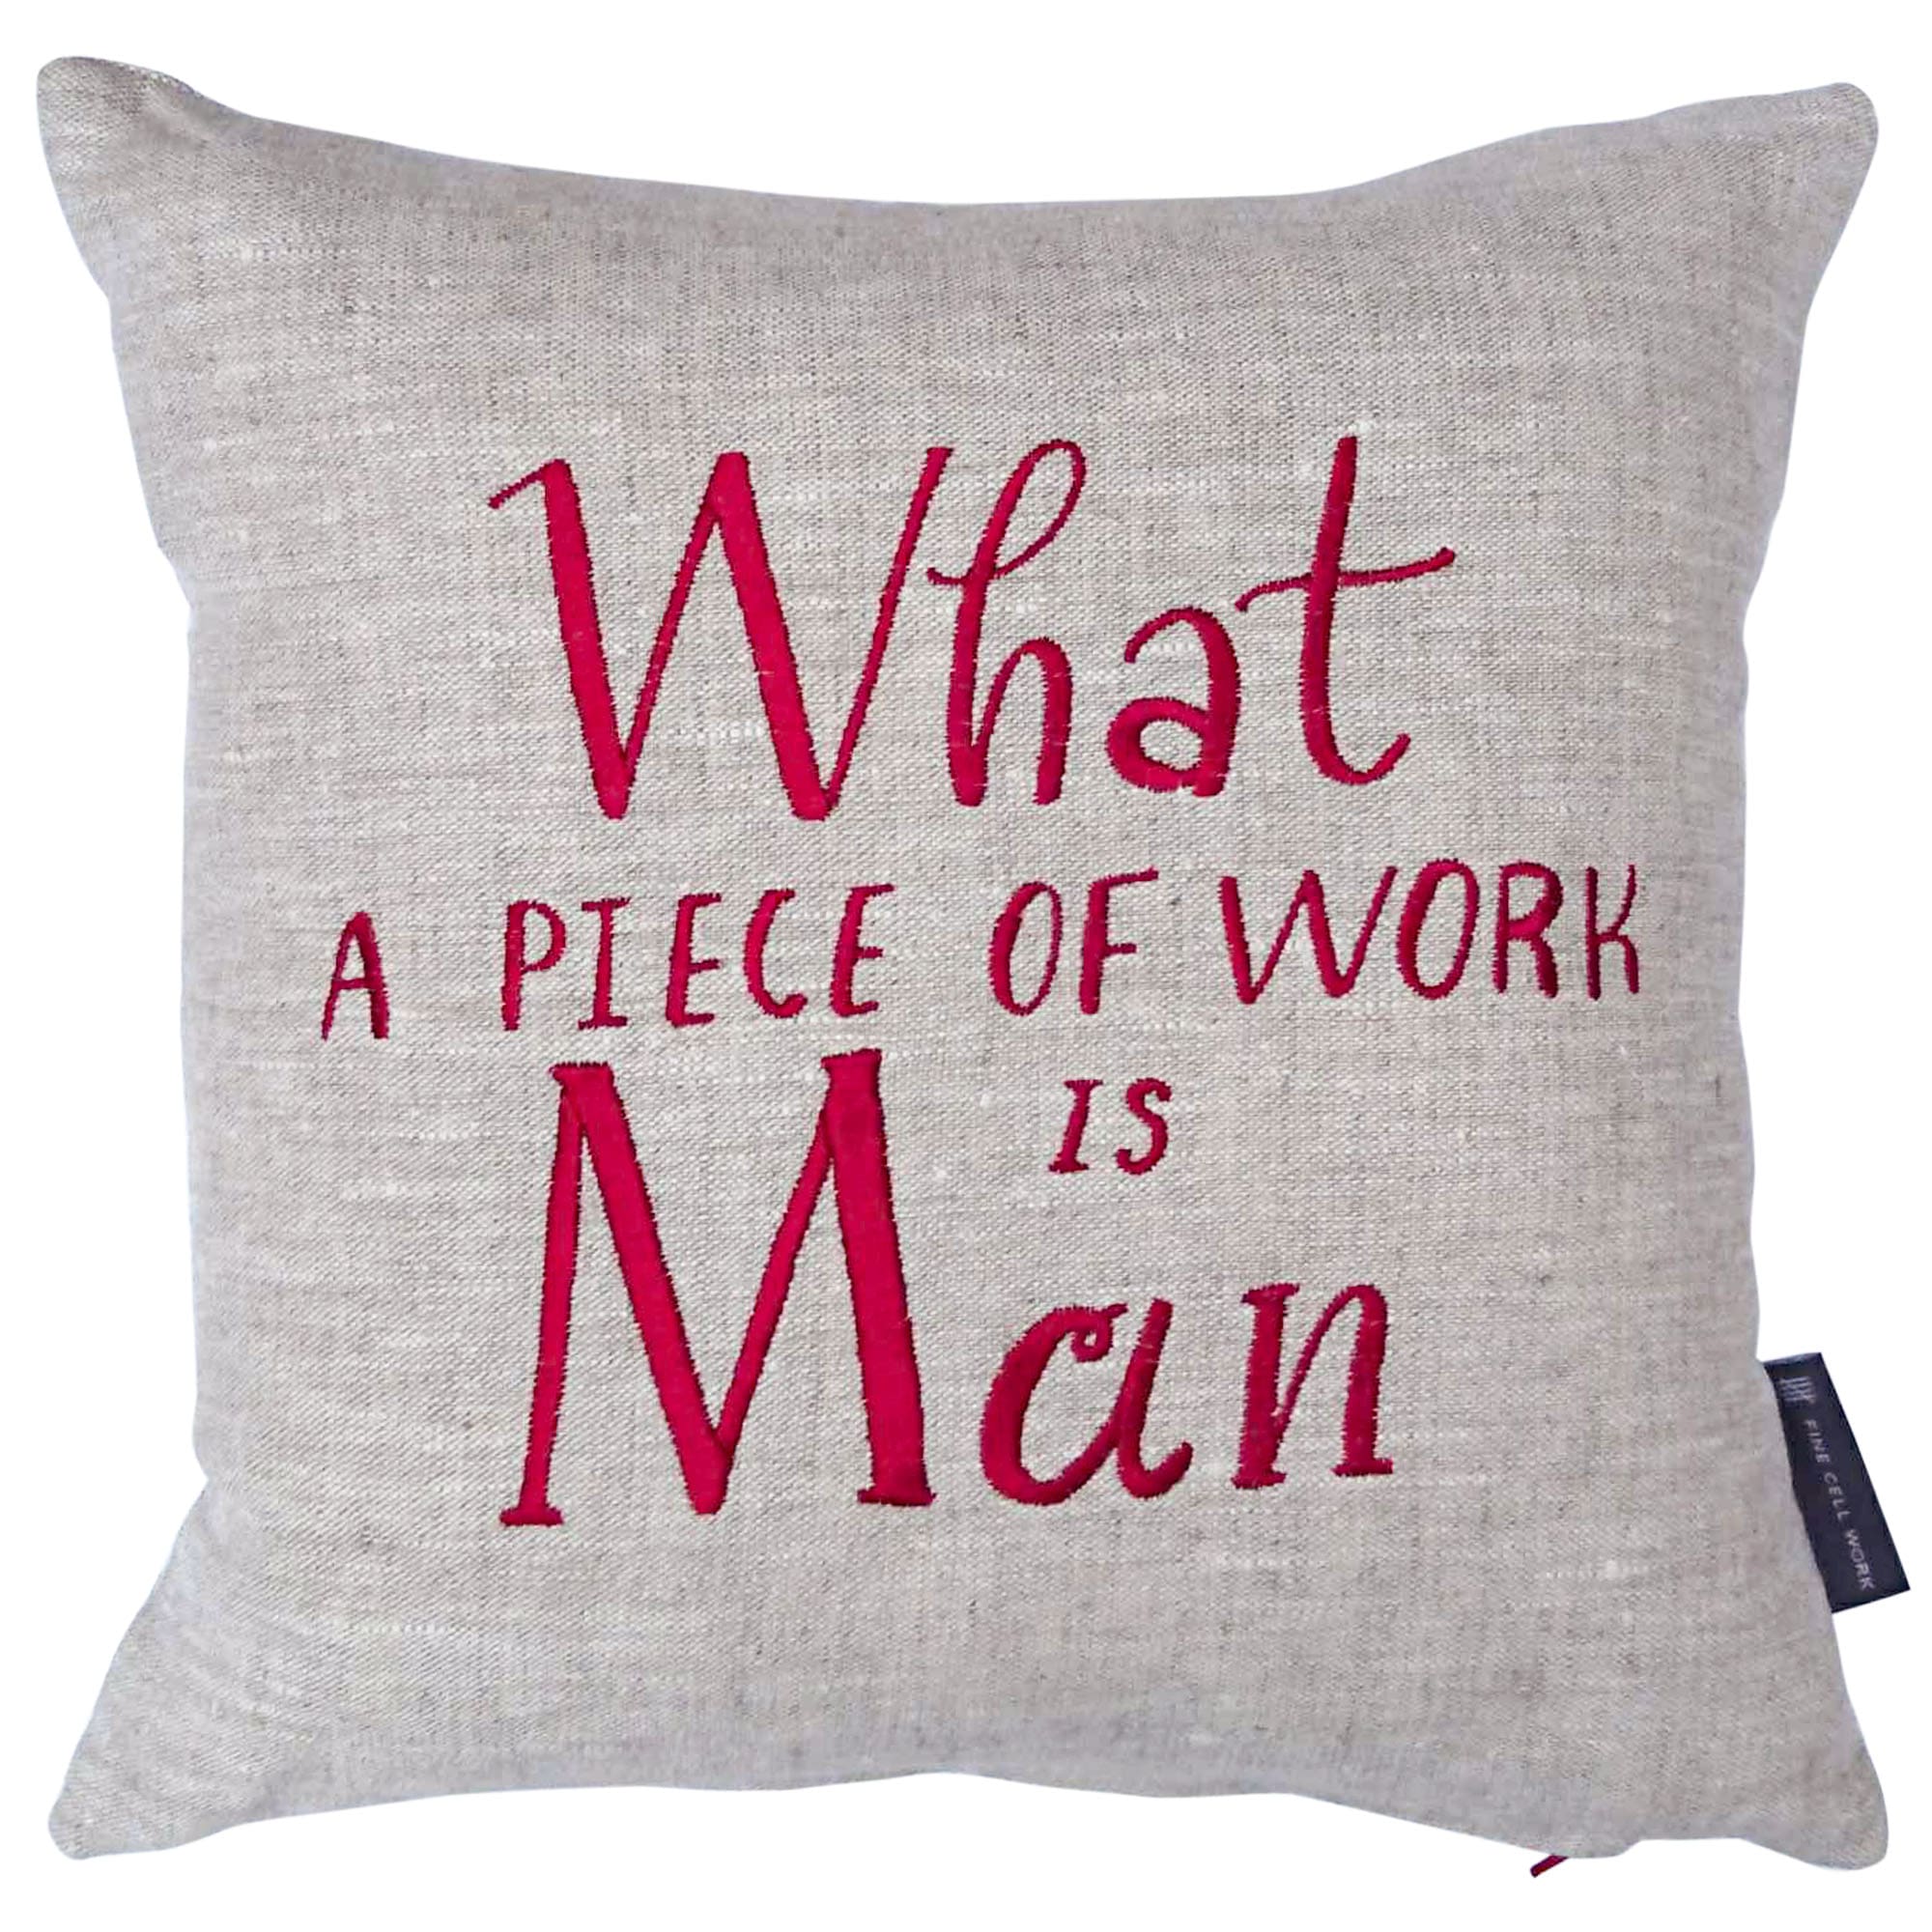 Fine-Cell-Work-Valentines-Collection-Shakespeare-Quote-Cushions-Oatmeal-Deep-Red-Piece-of-Work.jpg